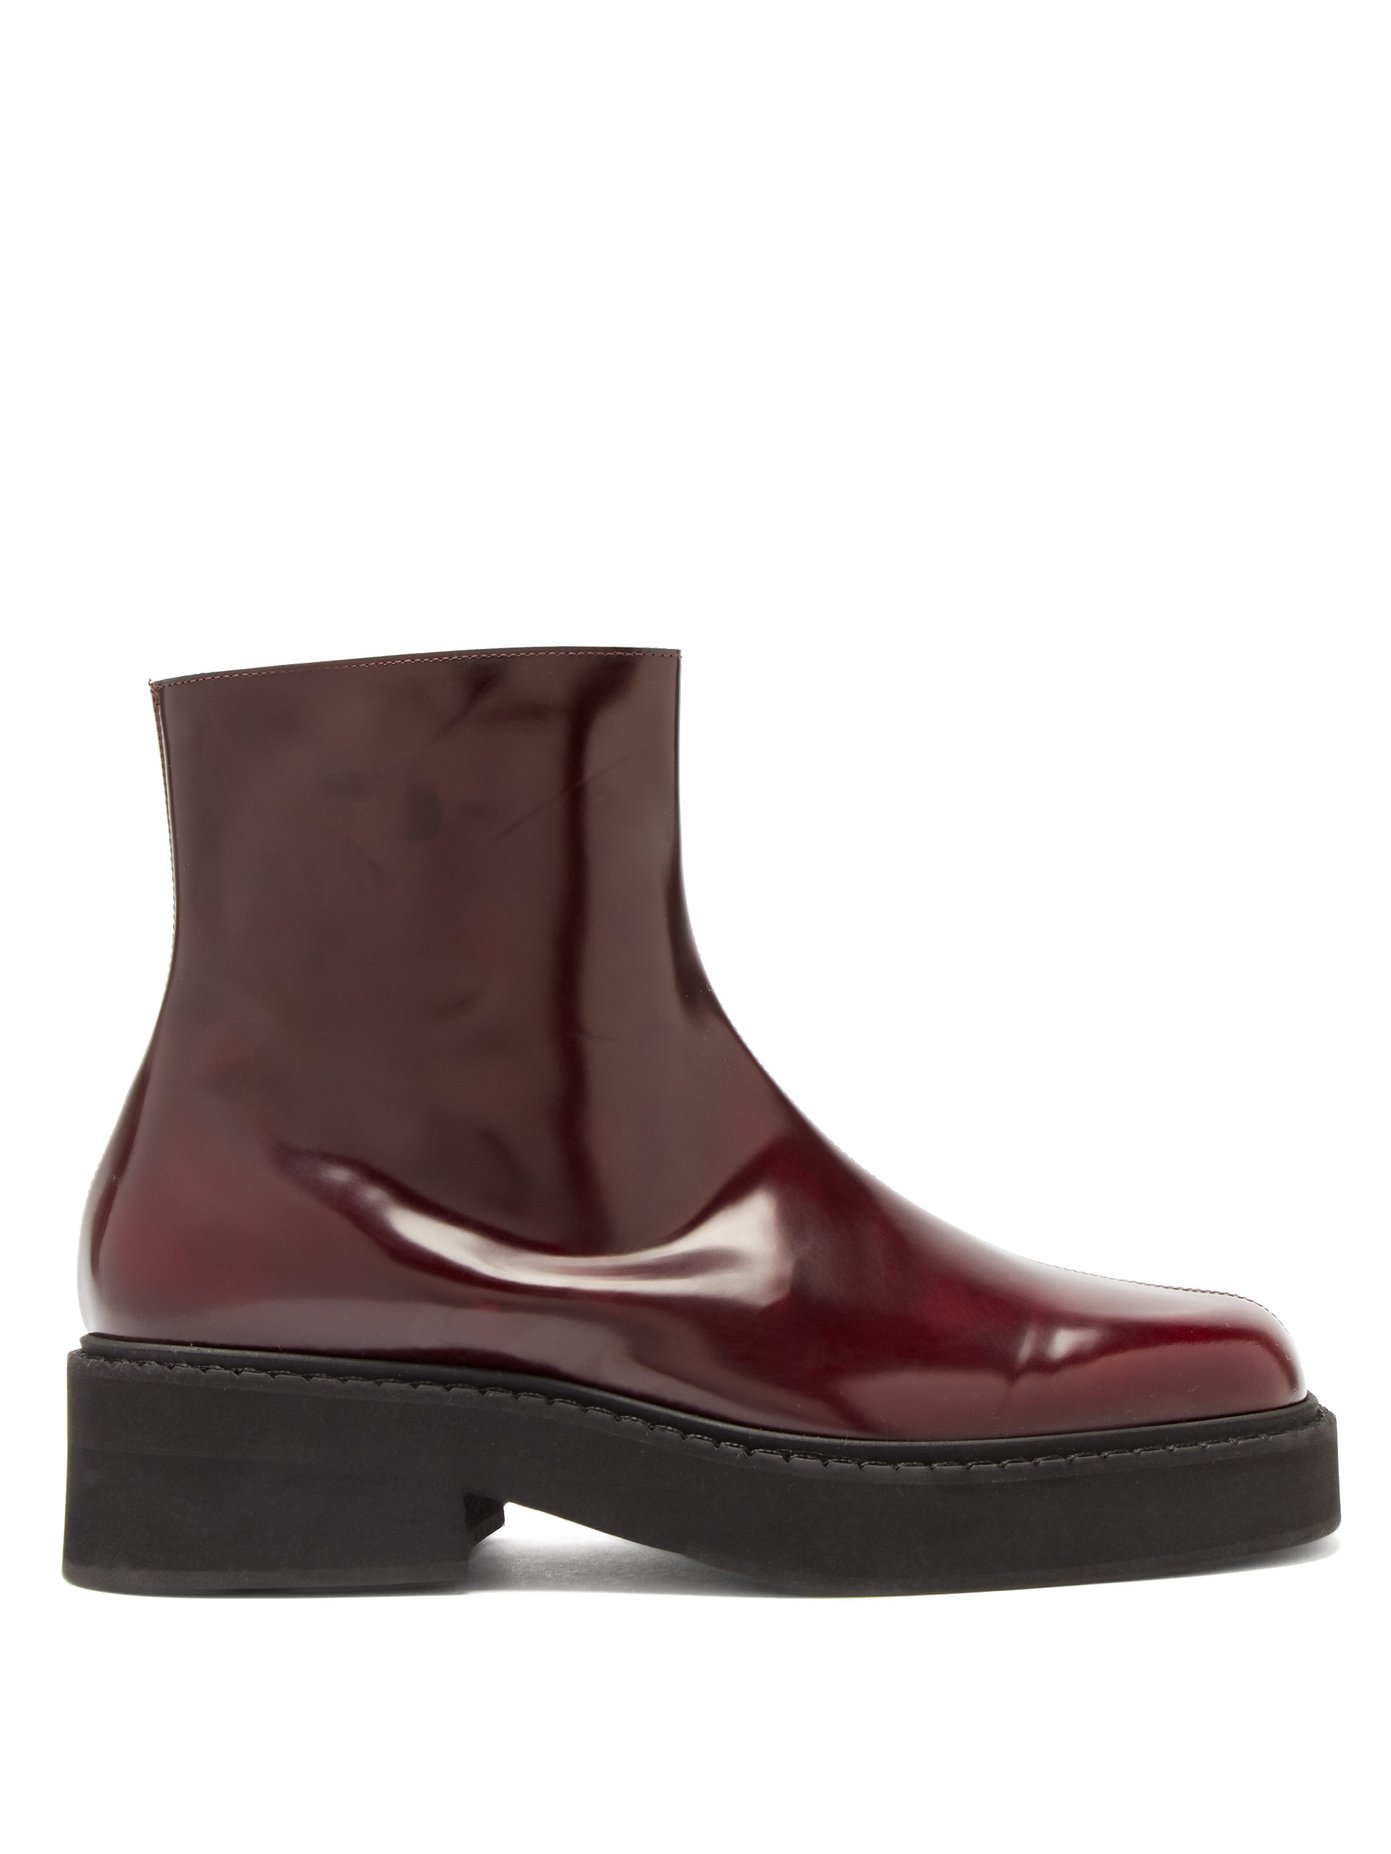 burgundy leather ankle boots uk